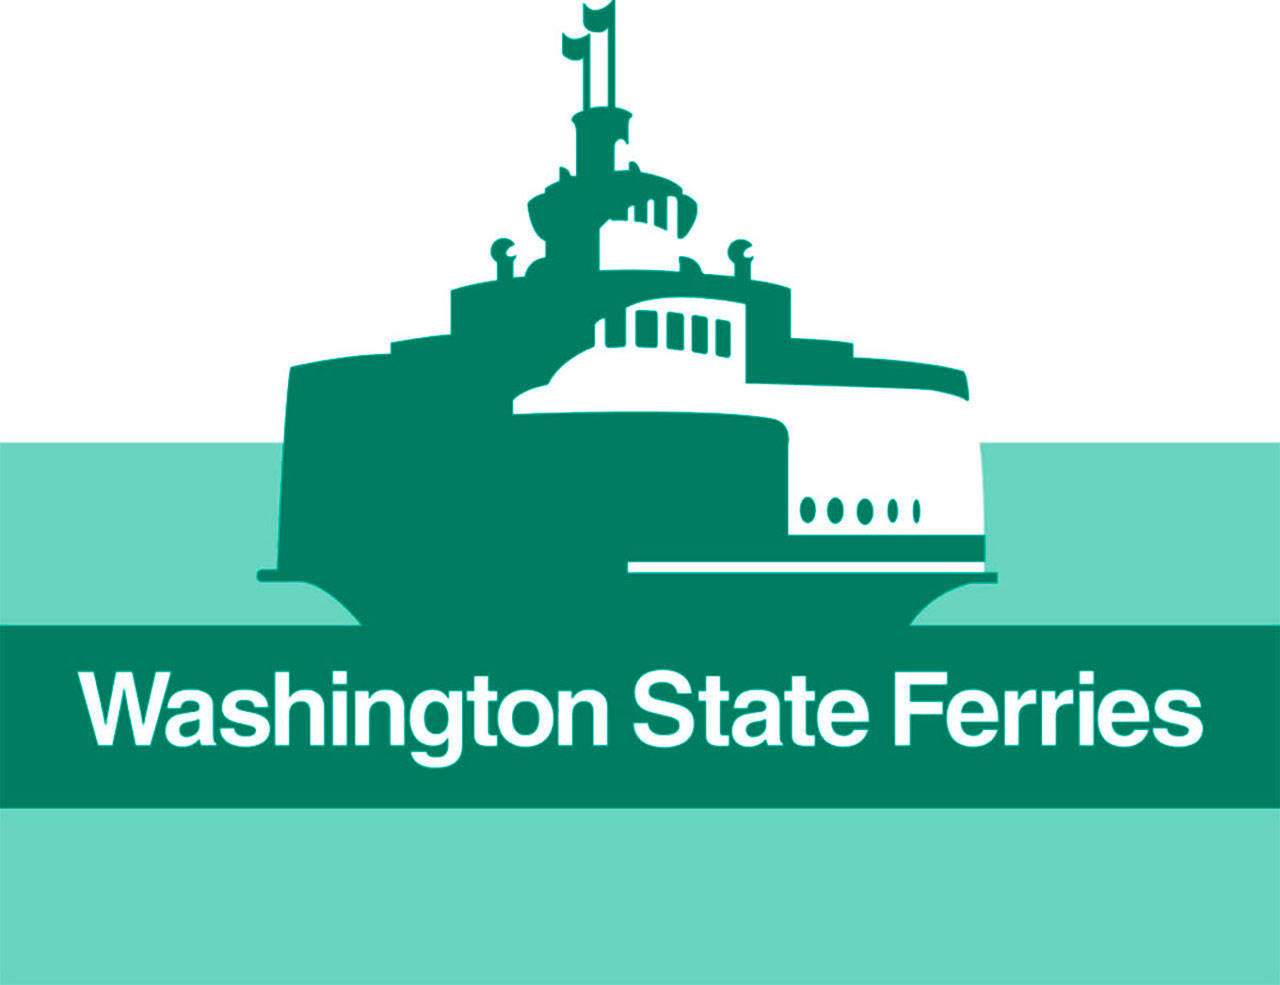 Share ideas at Washington State Ferries local open houses May 2